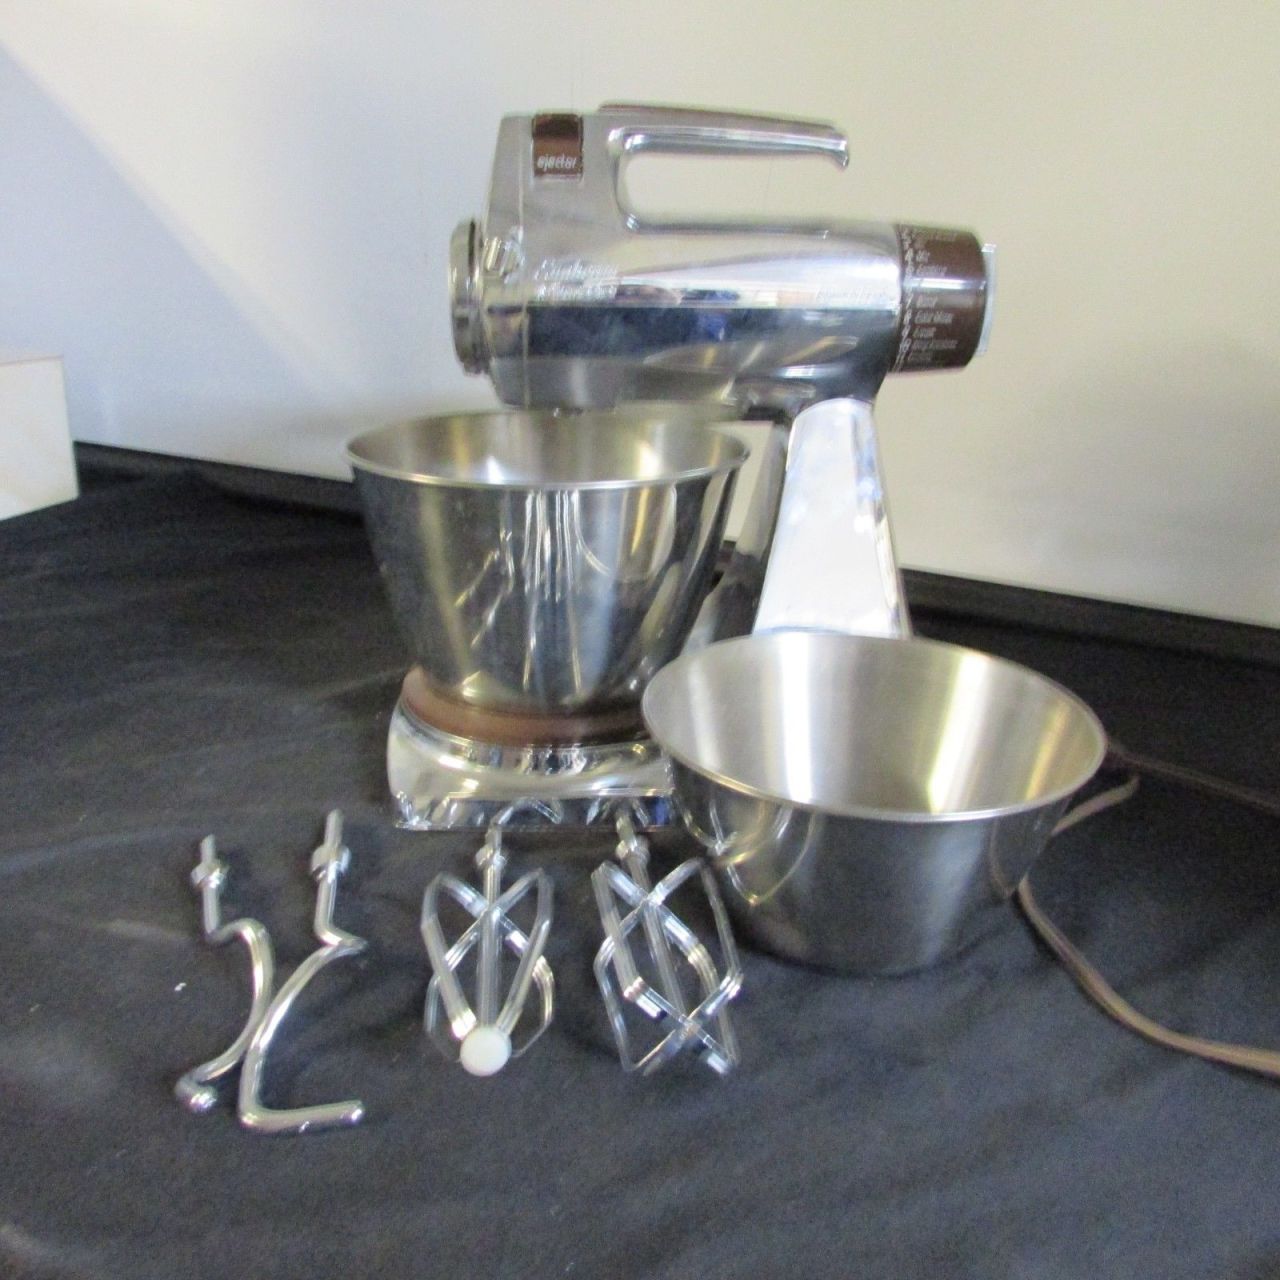 209) Vintage Sunbeam Electric Mixer 12 Speed ( Not Tested ) Light Weight  #23951